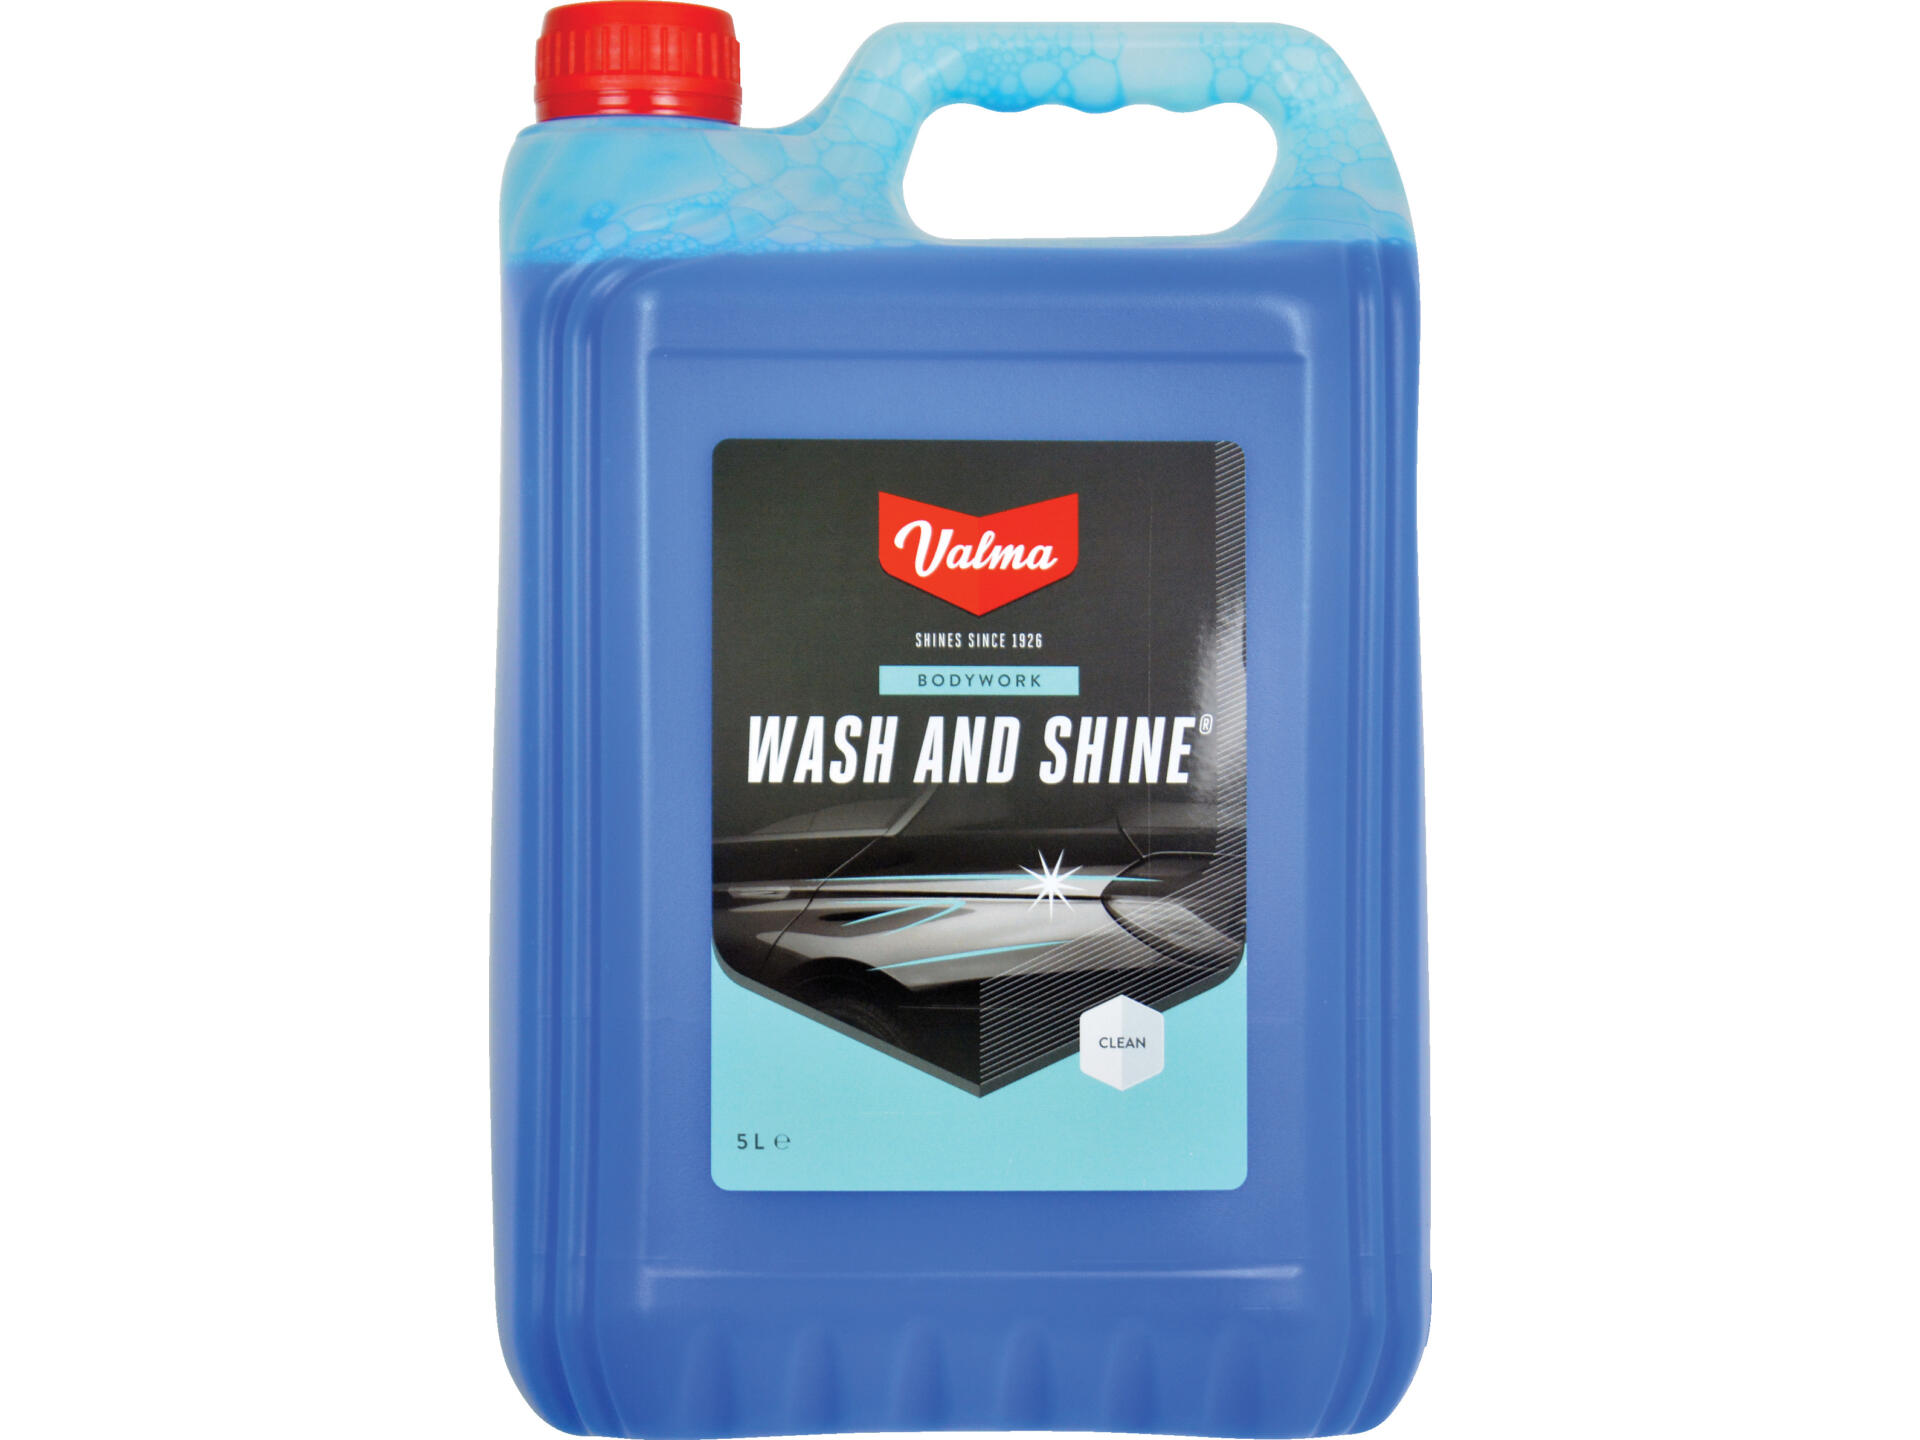 Valma Wash and Shine shampooing voiture 5l